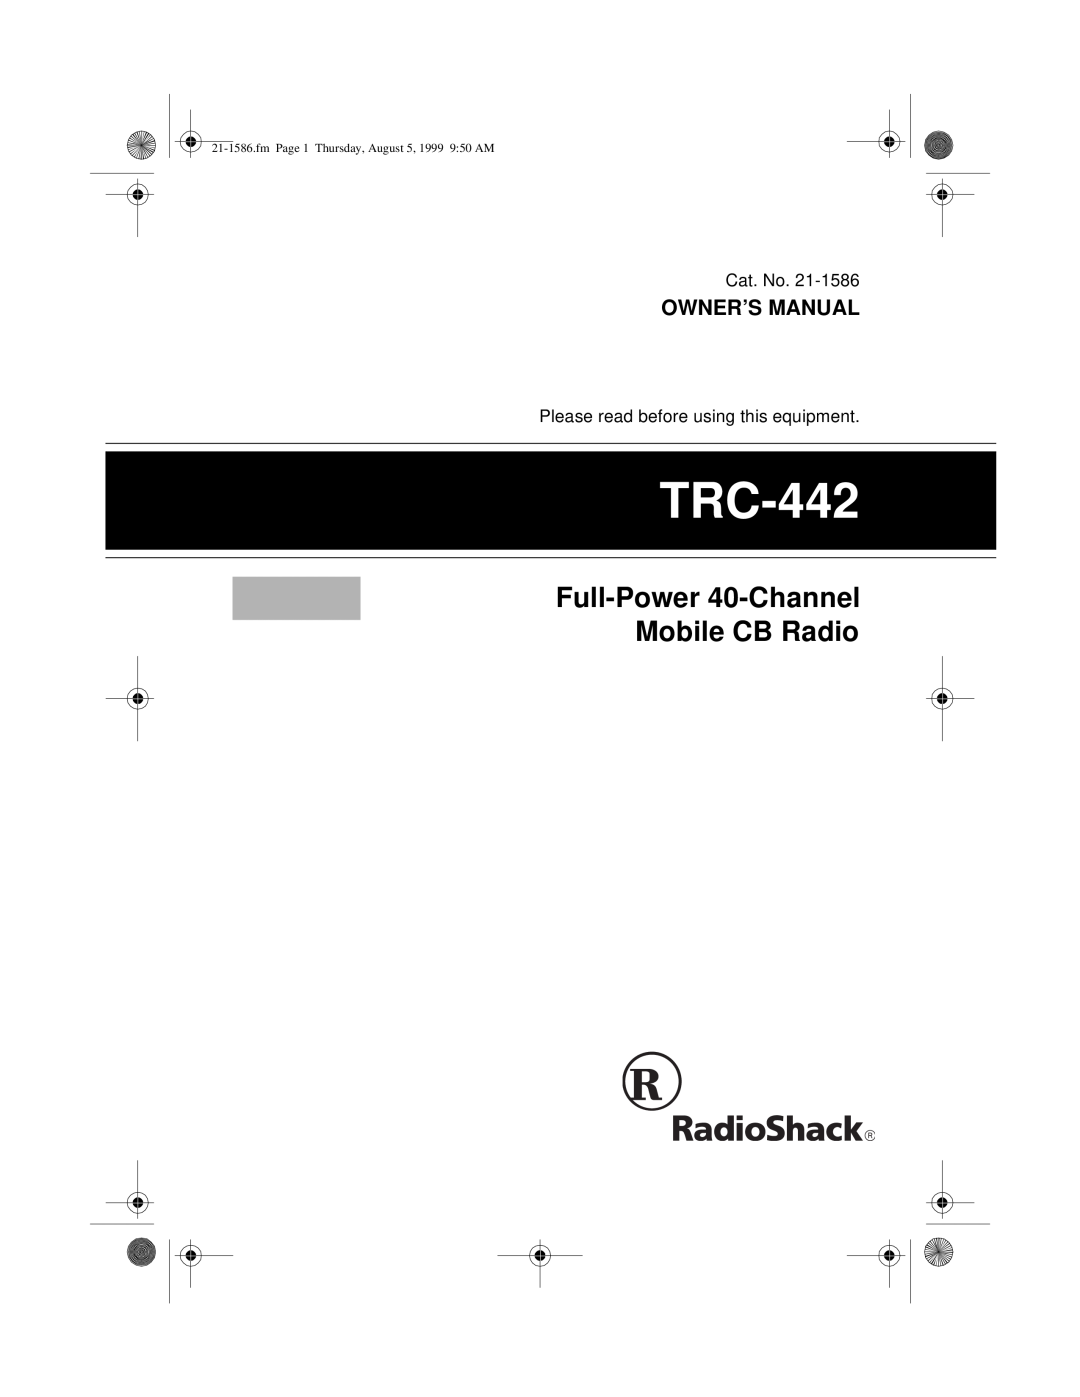 Radio Shack TRC-442 owner manual Full-Power 40-Channel Mobile CB Radio, fmPage 1 Thursday, August 5, 1999 9 50 AM 